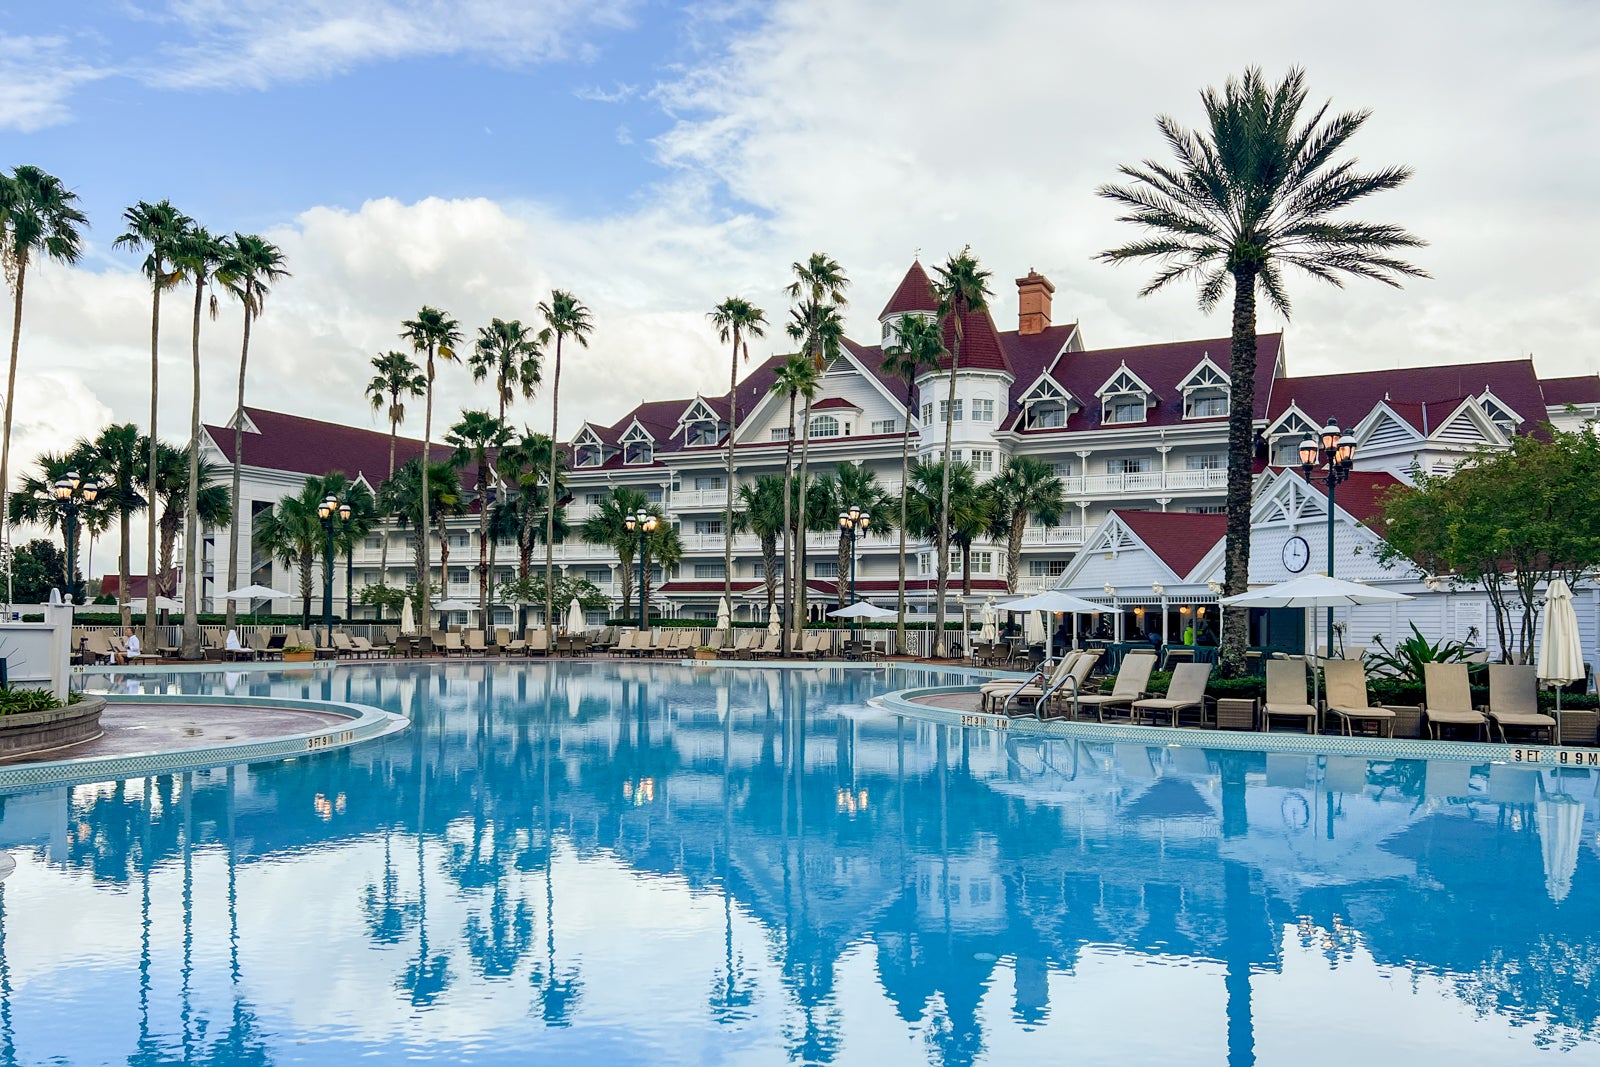 8 Things To Know Before You Decide To Stay At Disneys Grand Floridian